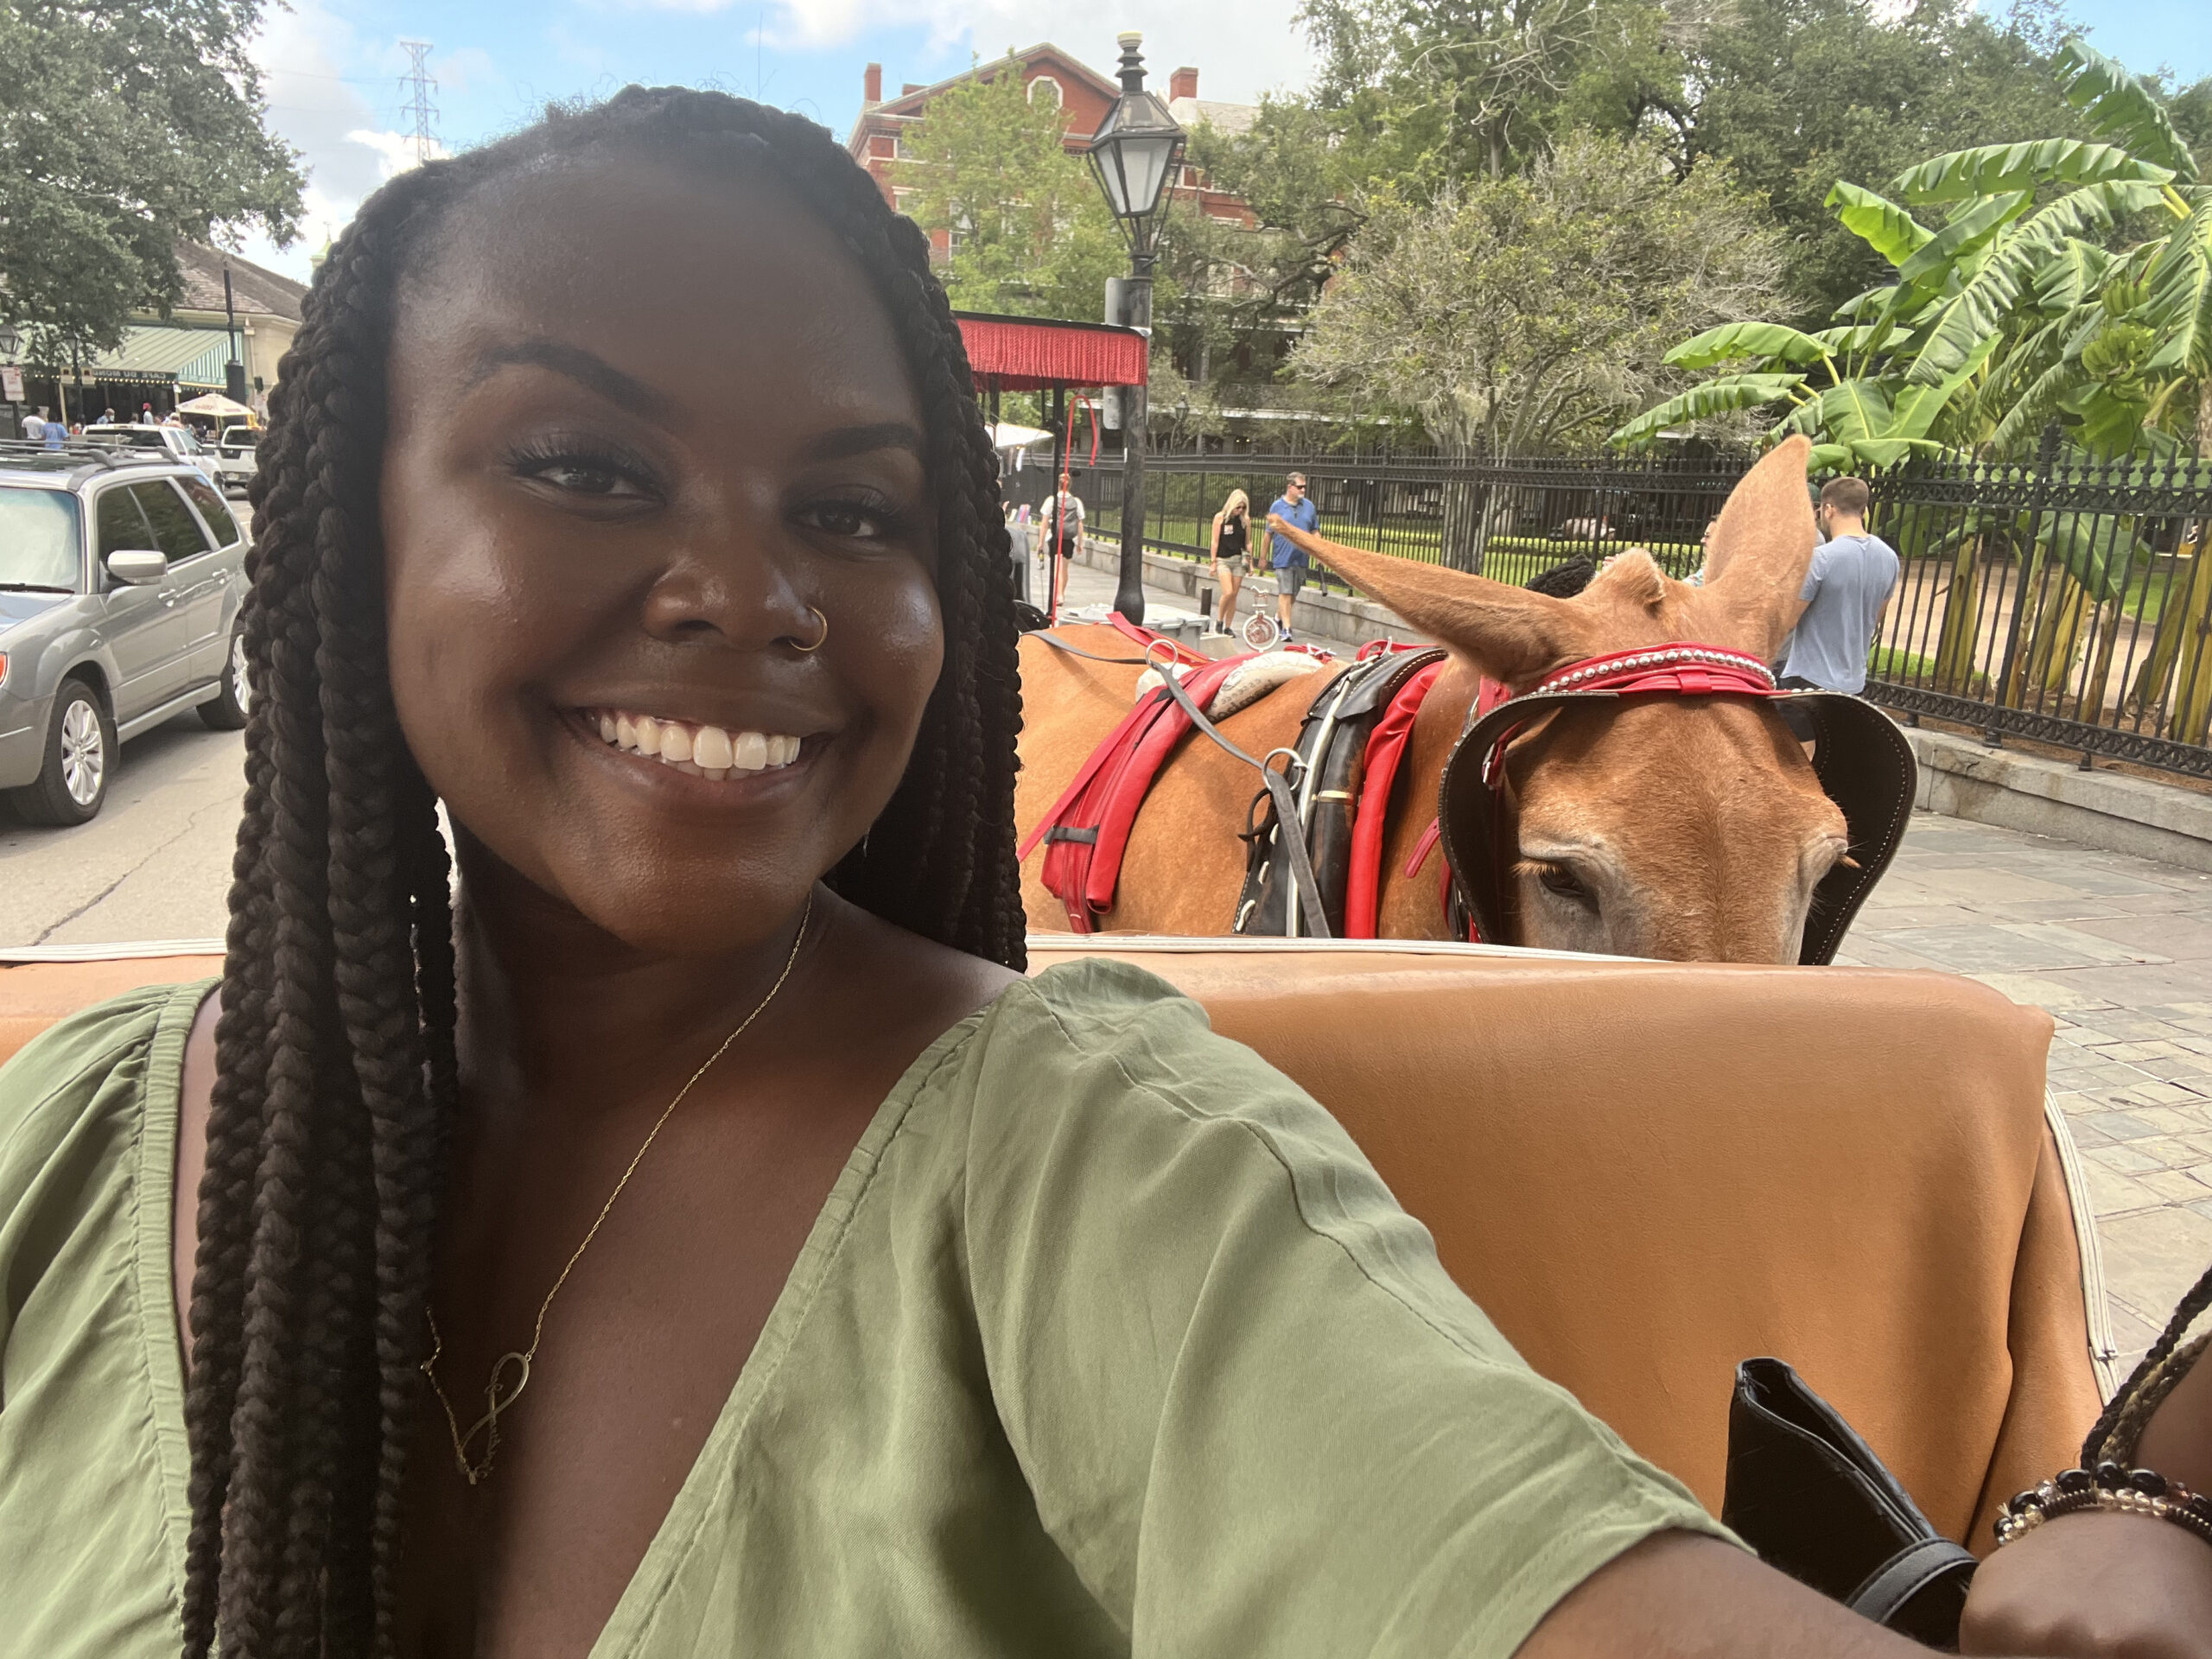 Christina Jane taking a selfie with the horse while on the carriage. 